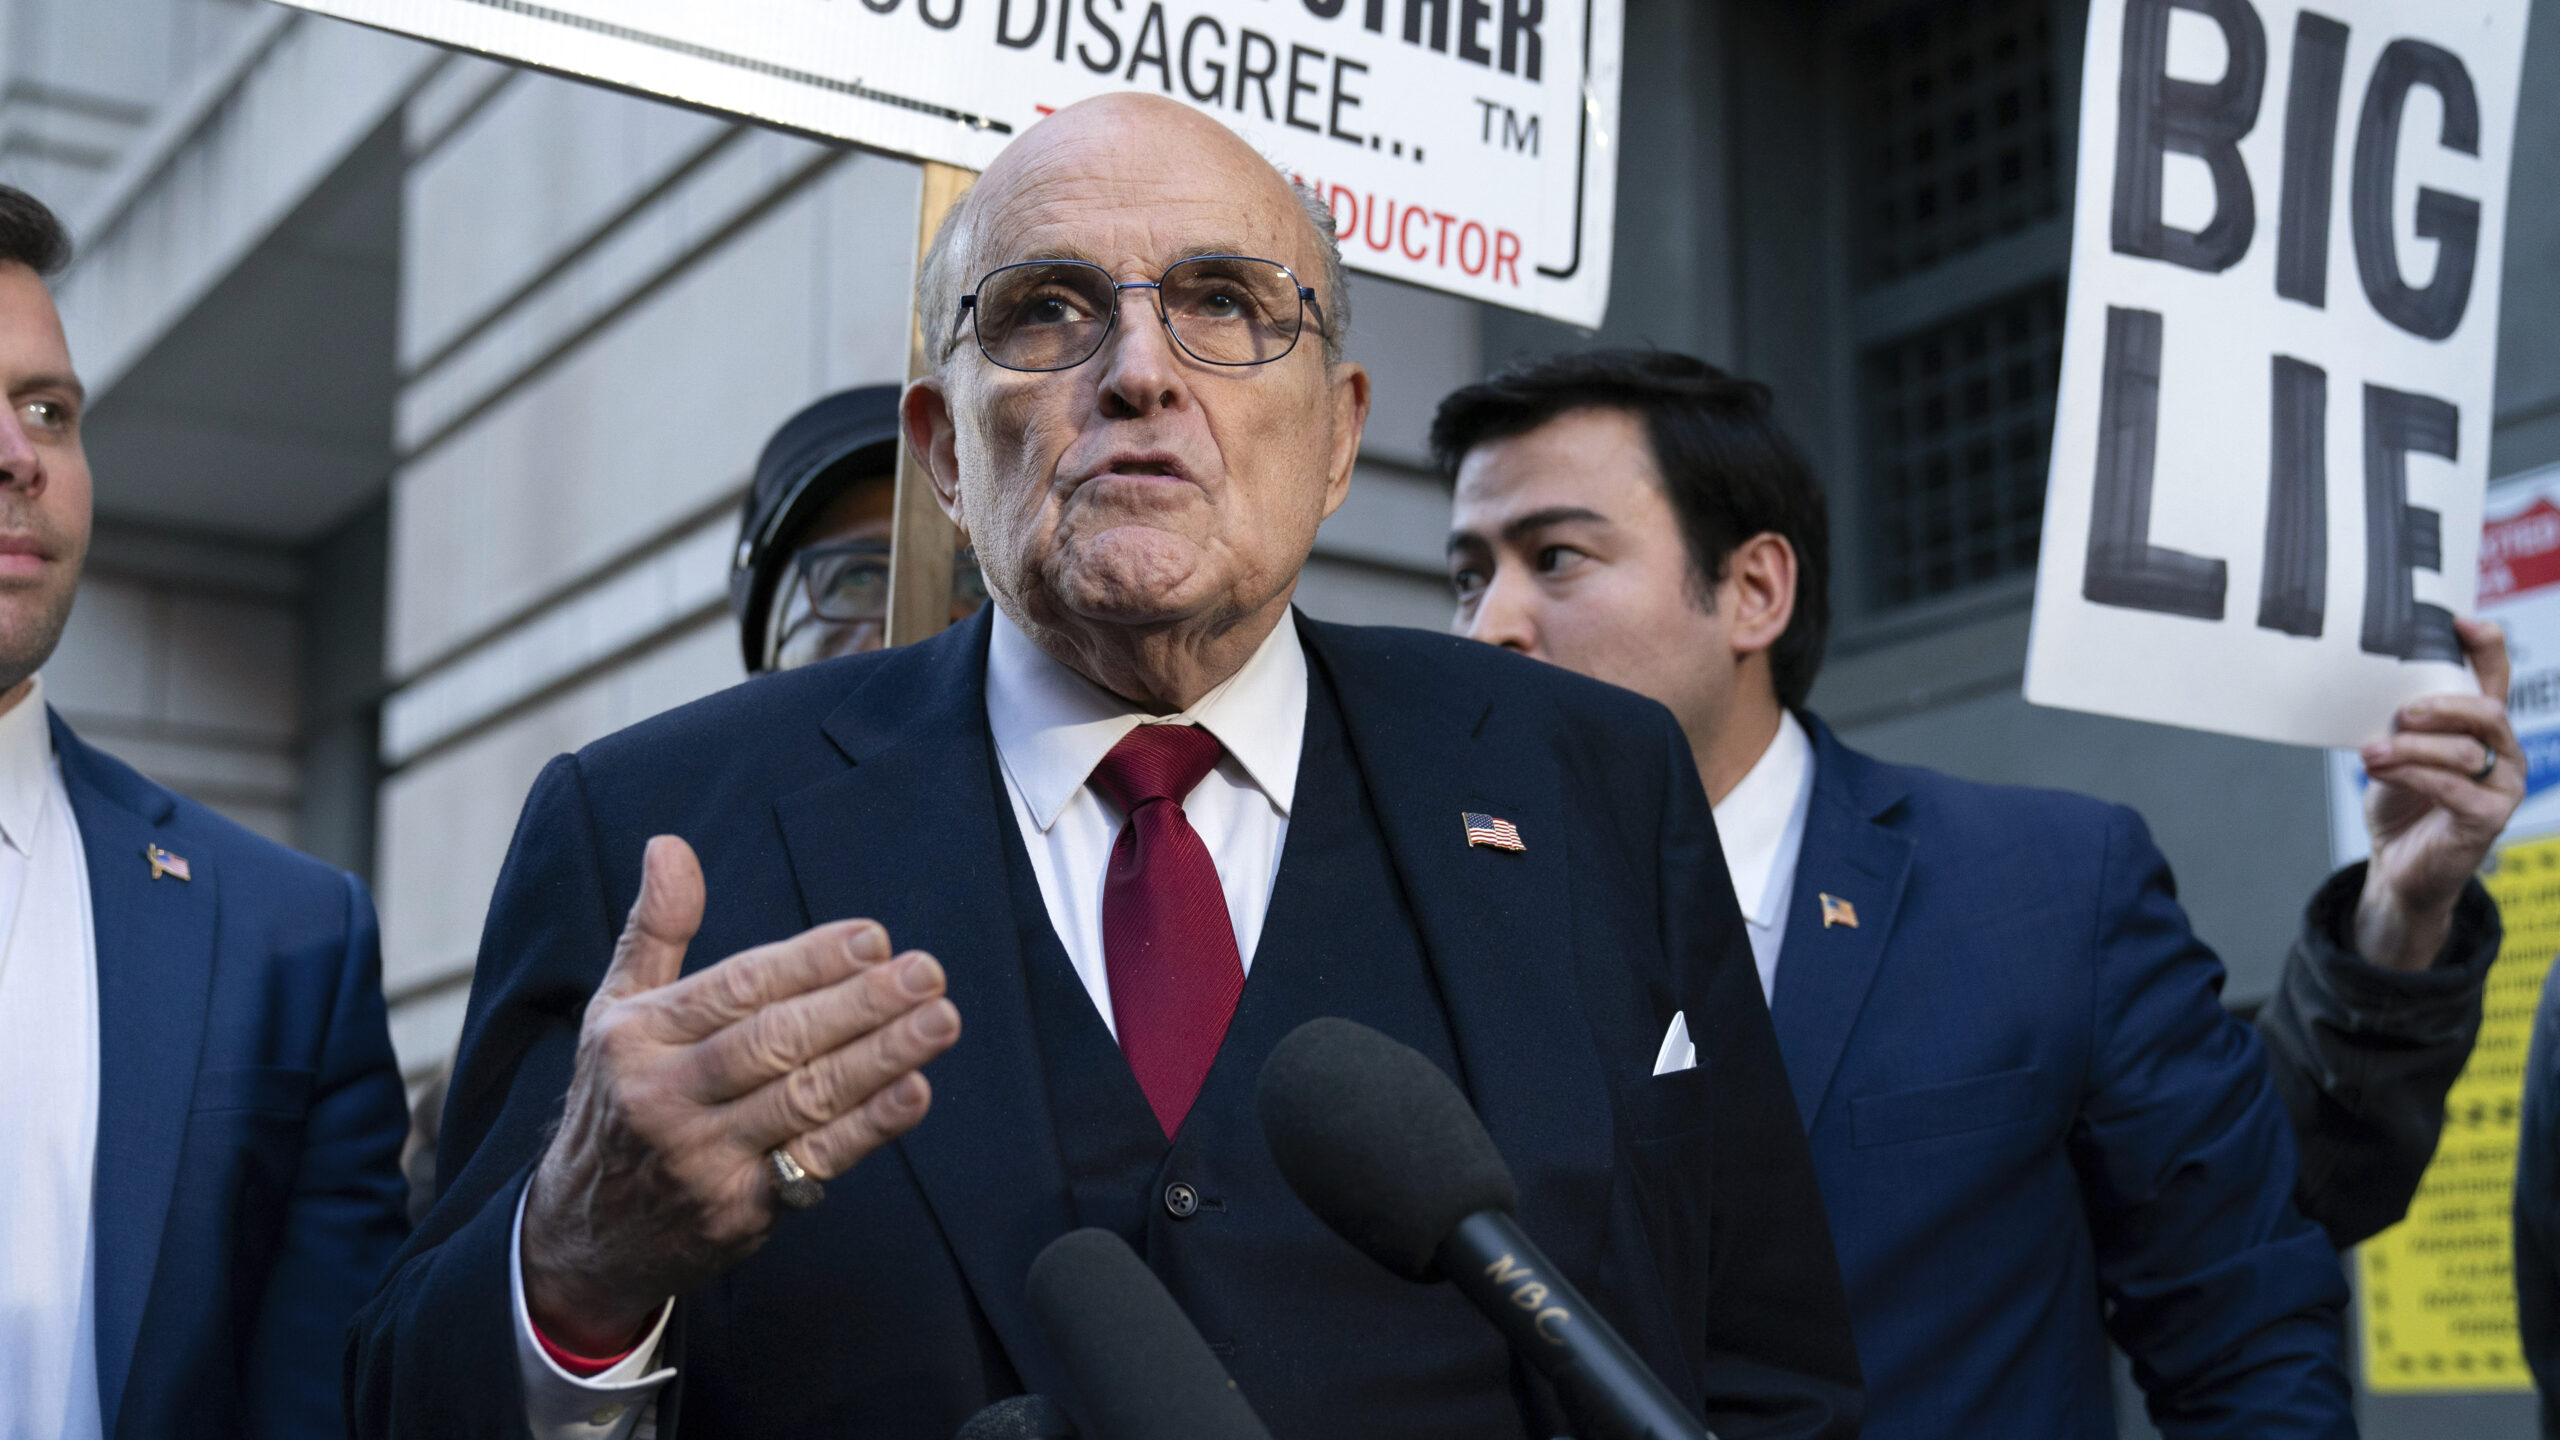 Rudy Giuliani speaks during a news conference after his defamation trial outside the federal courthouse in Washington,